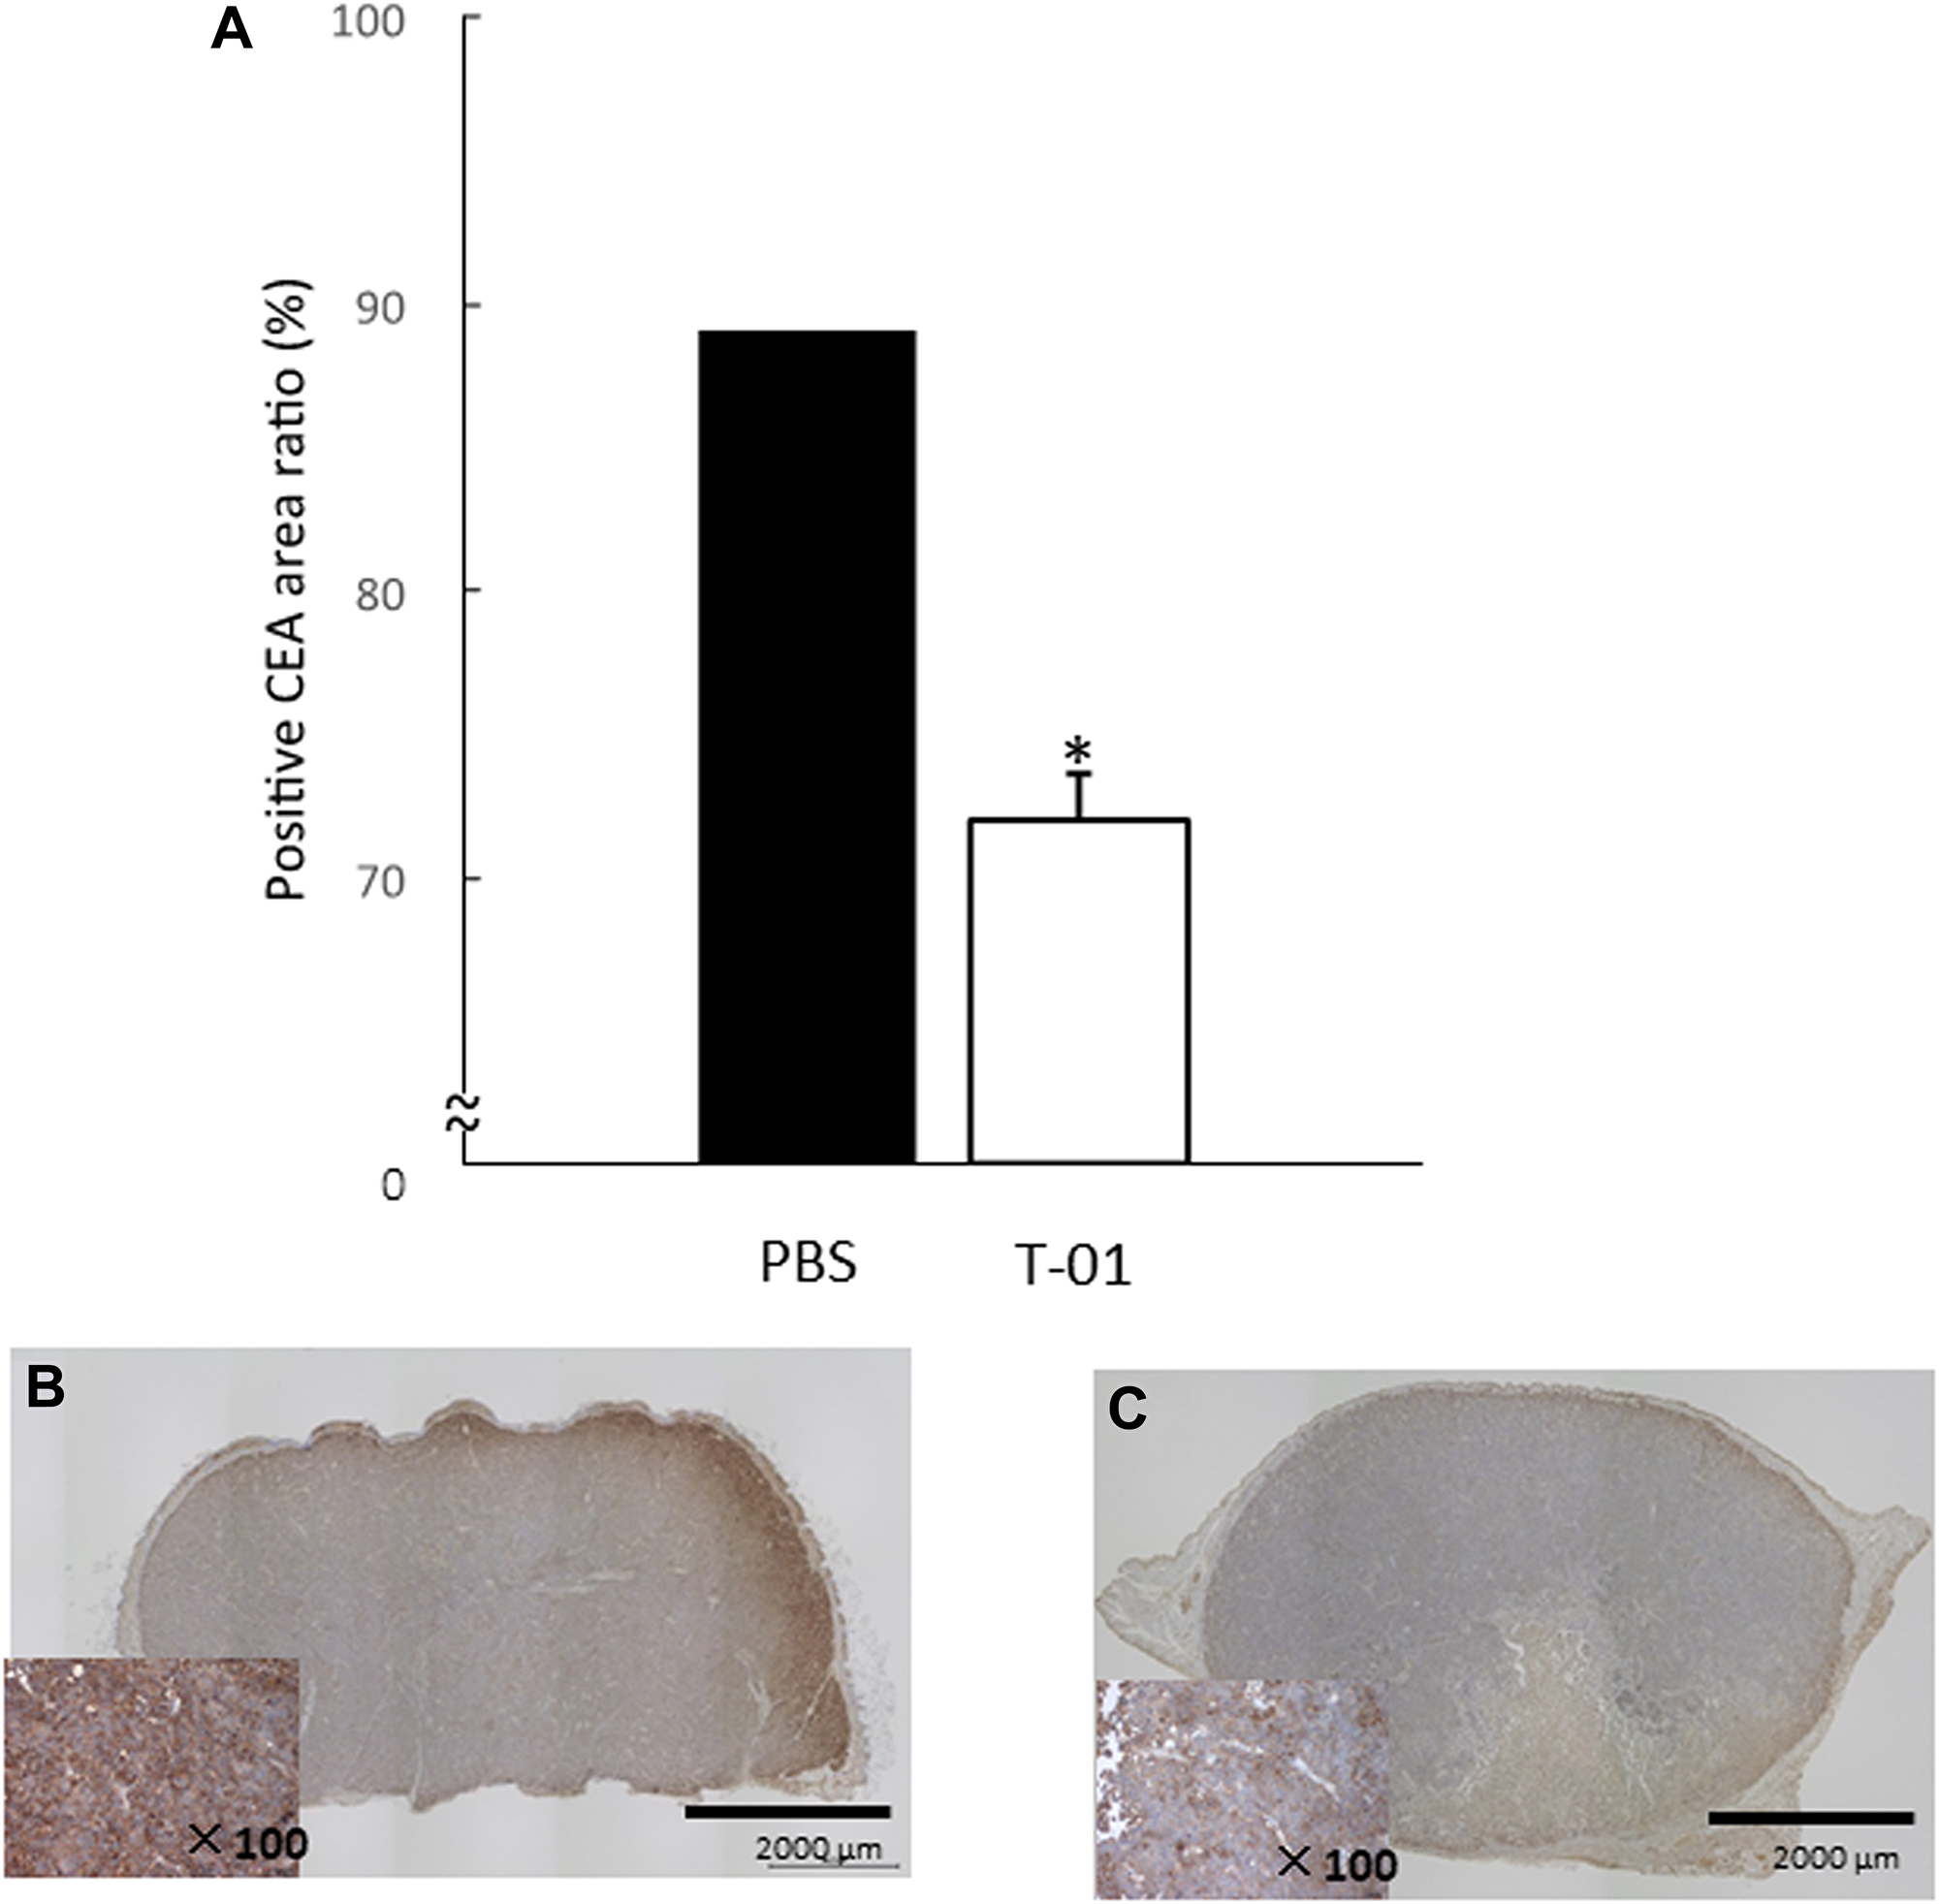 Quantitative analysis of intratumoral CEA in mice with subcutaneous tumors.